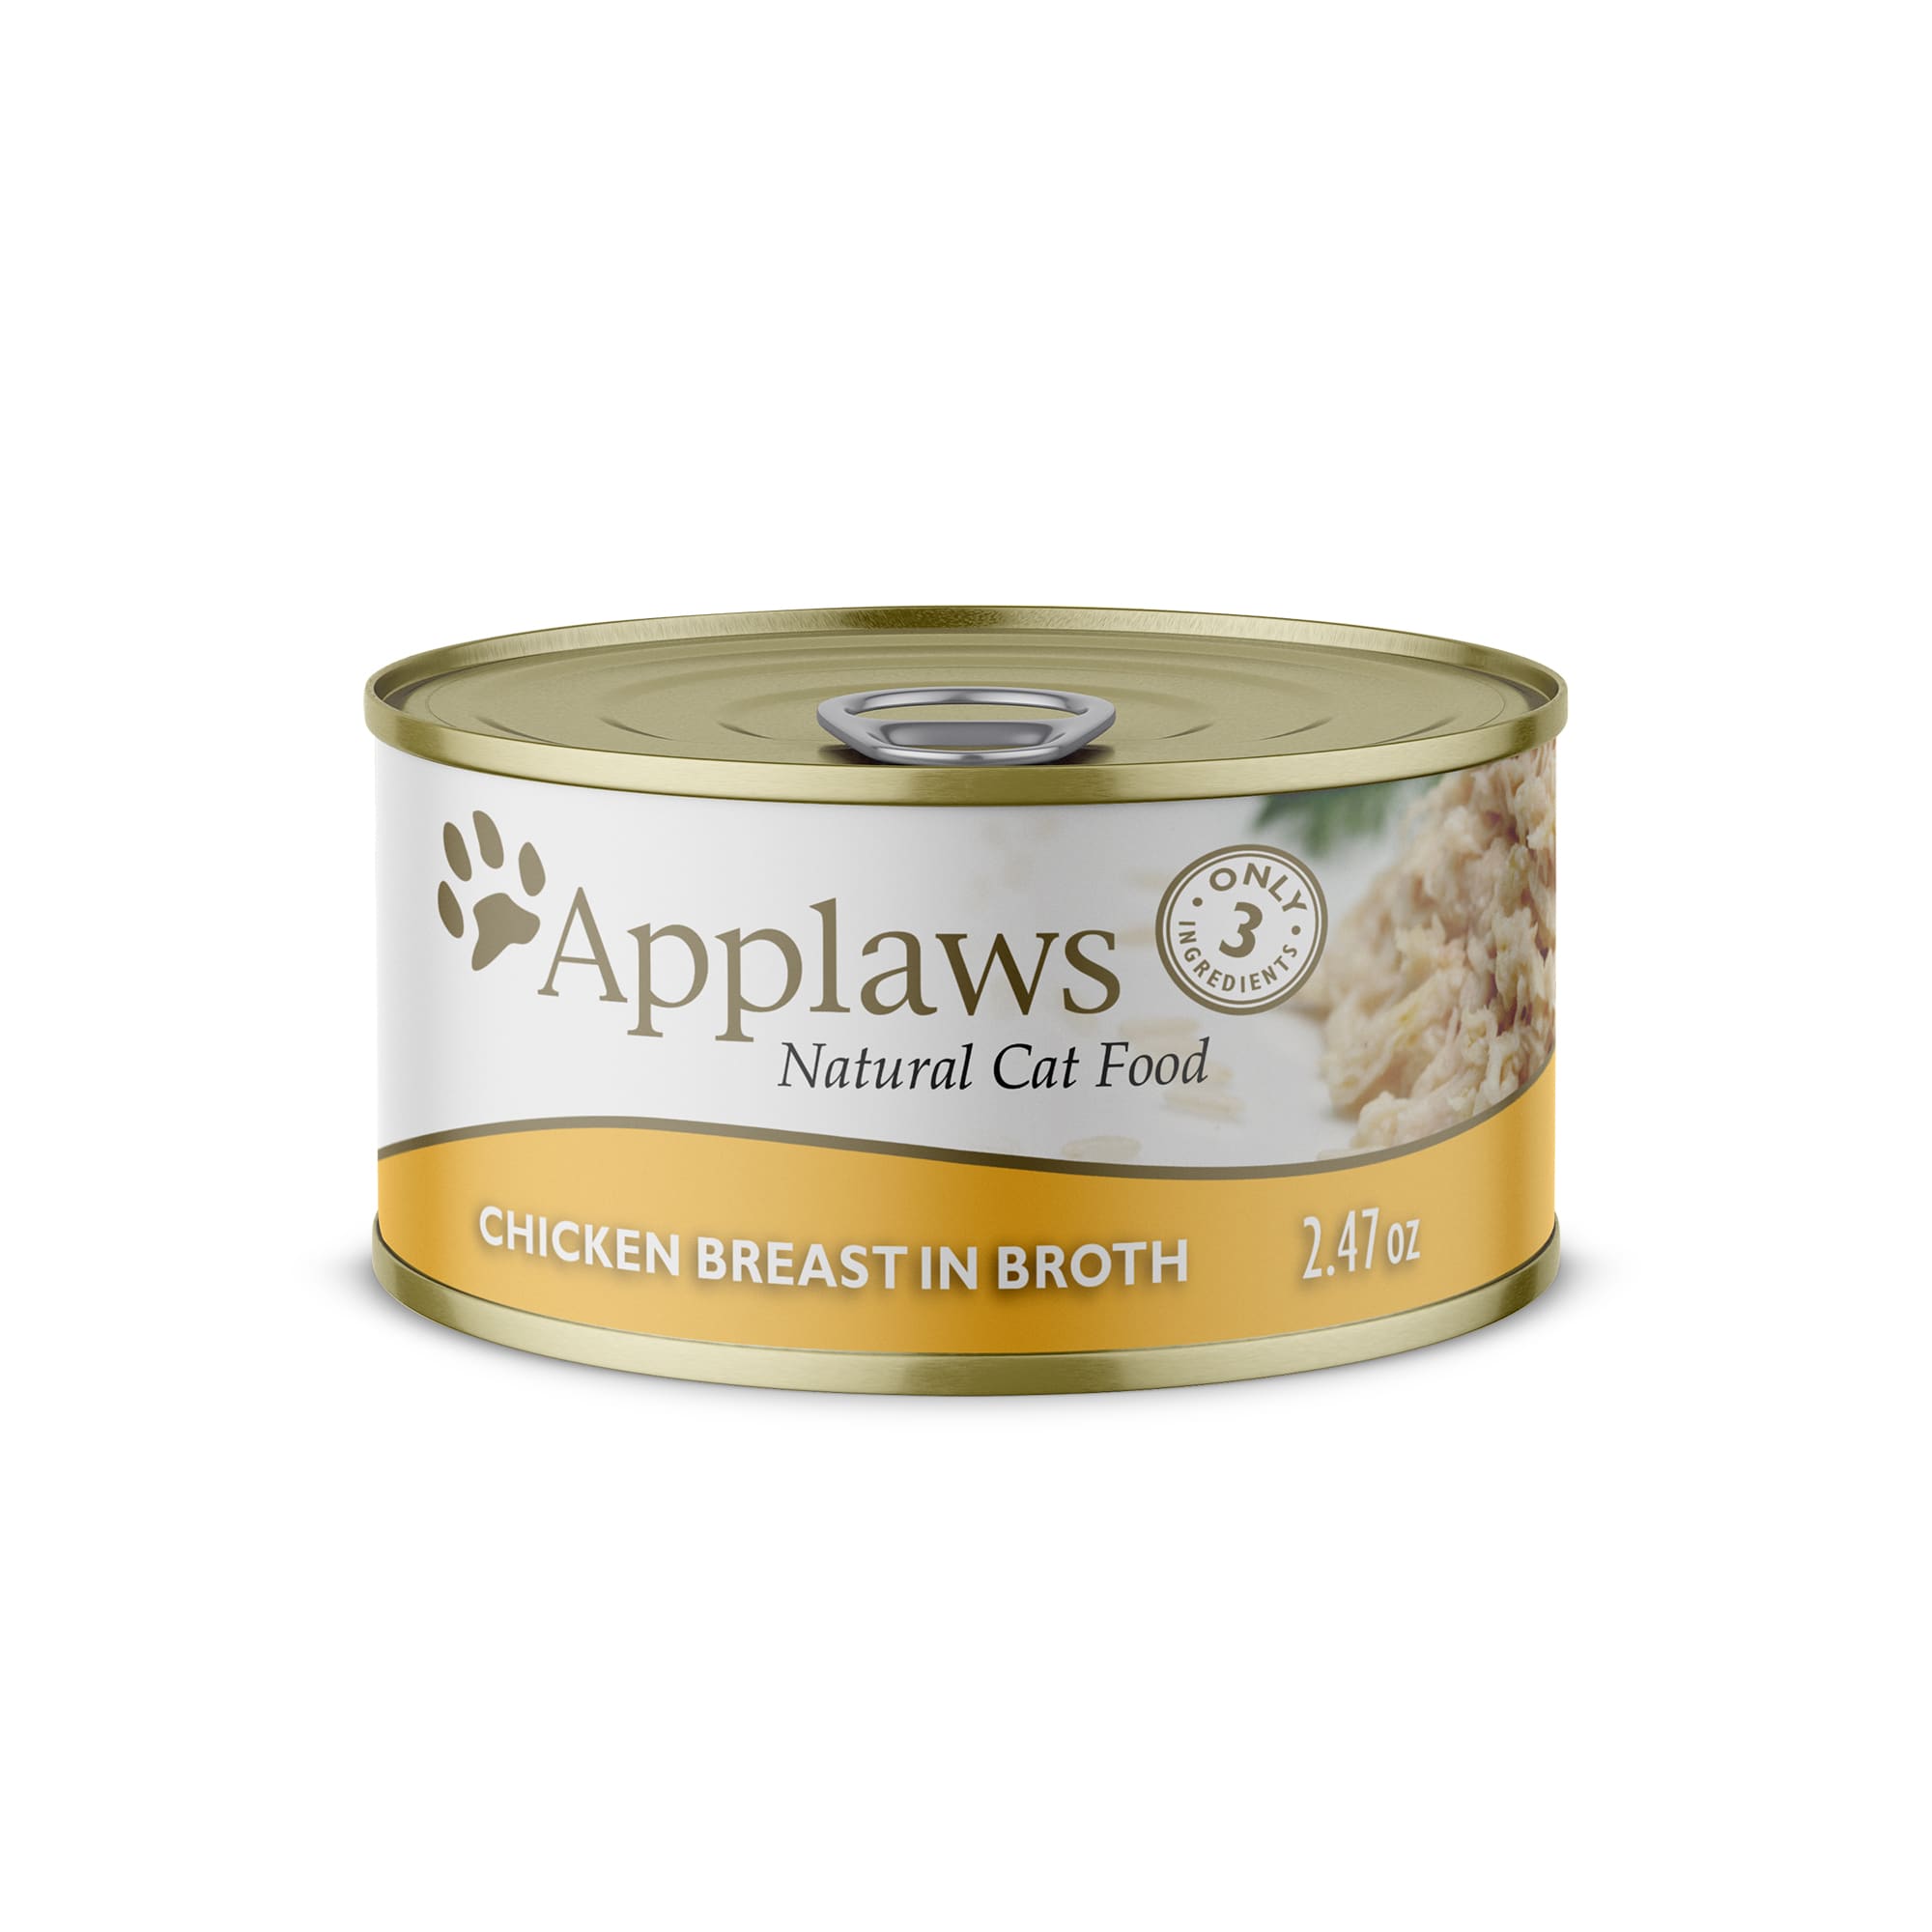 applaws complete cat food